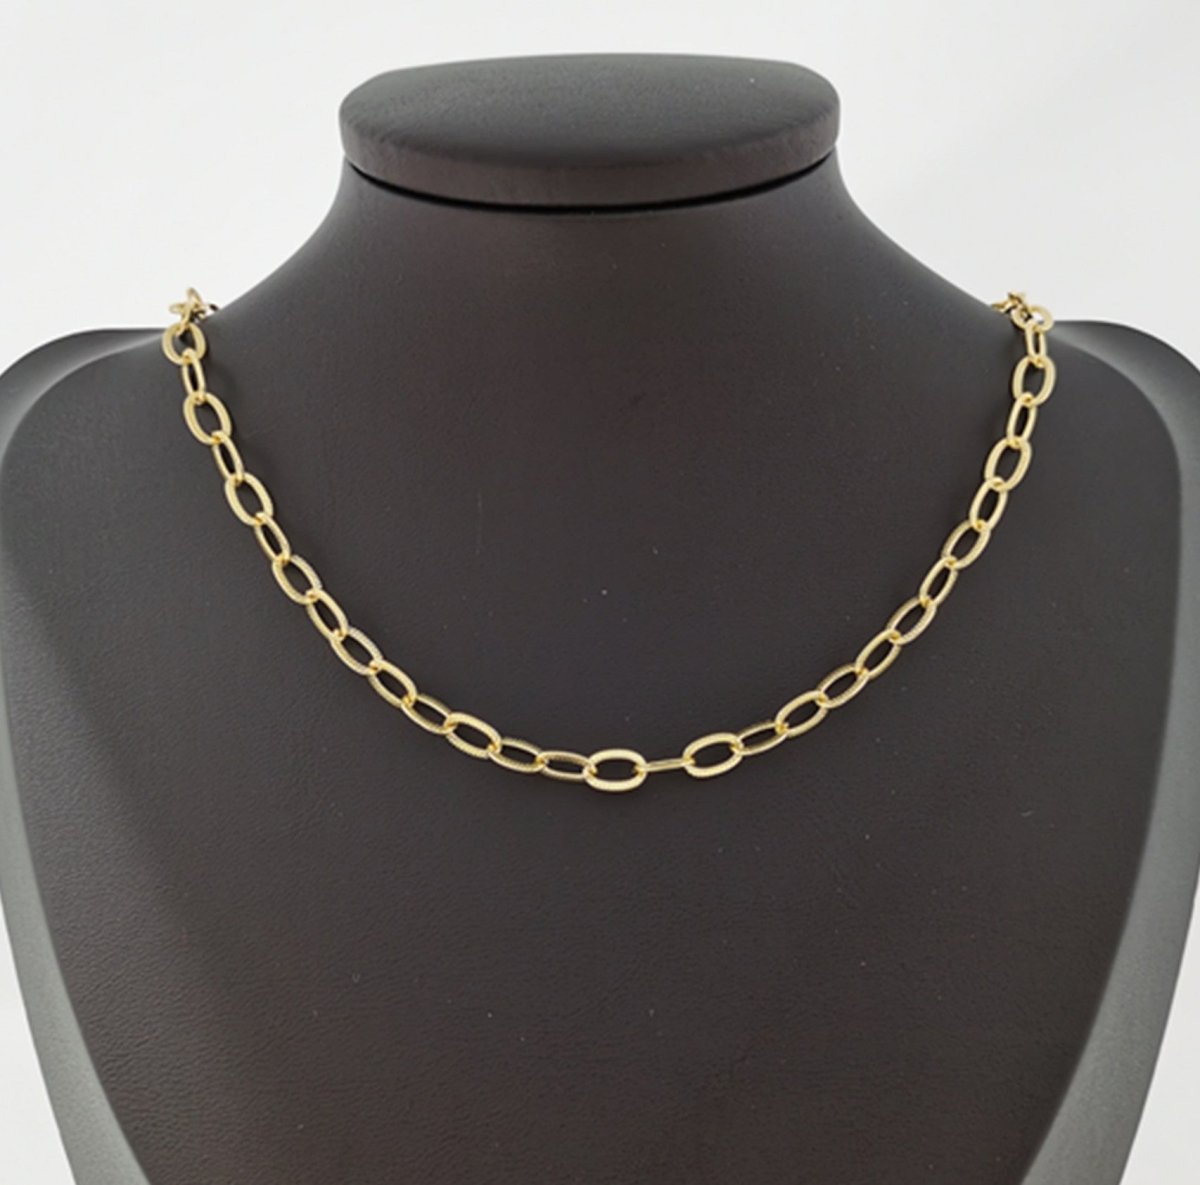 Clearance Pricing BLOWOUT 24k Gold Filled Oval Cable Link Chain 7x5 Link Chain, Textured Chain, Soldered Cable Link Chain by Yard for Necklace Bracelet ROLL-187 - DLUXCA